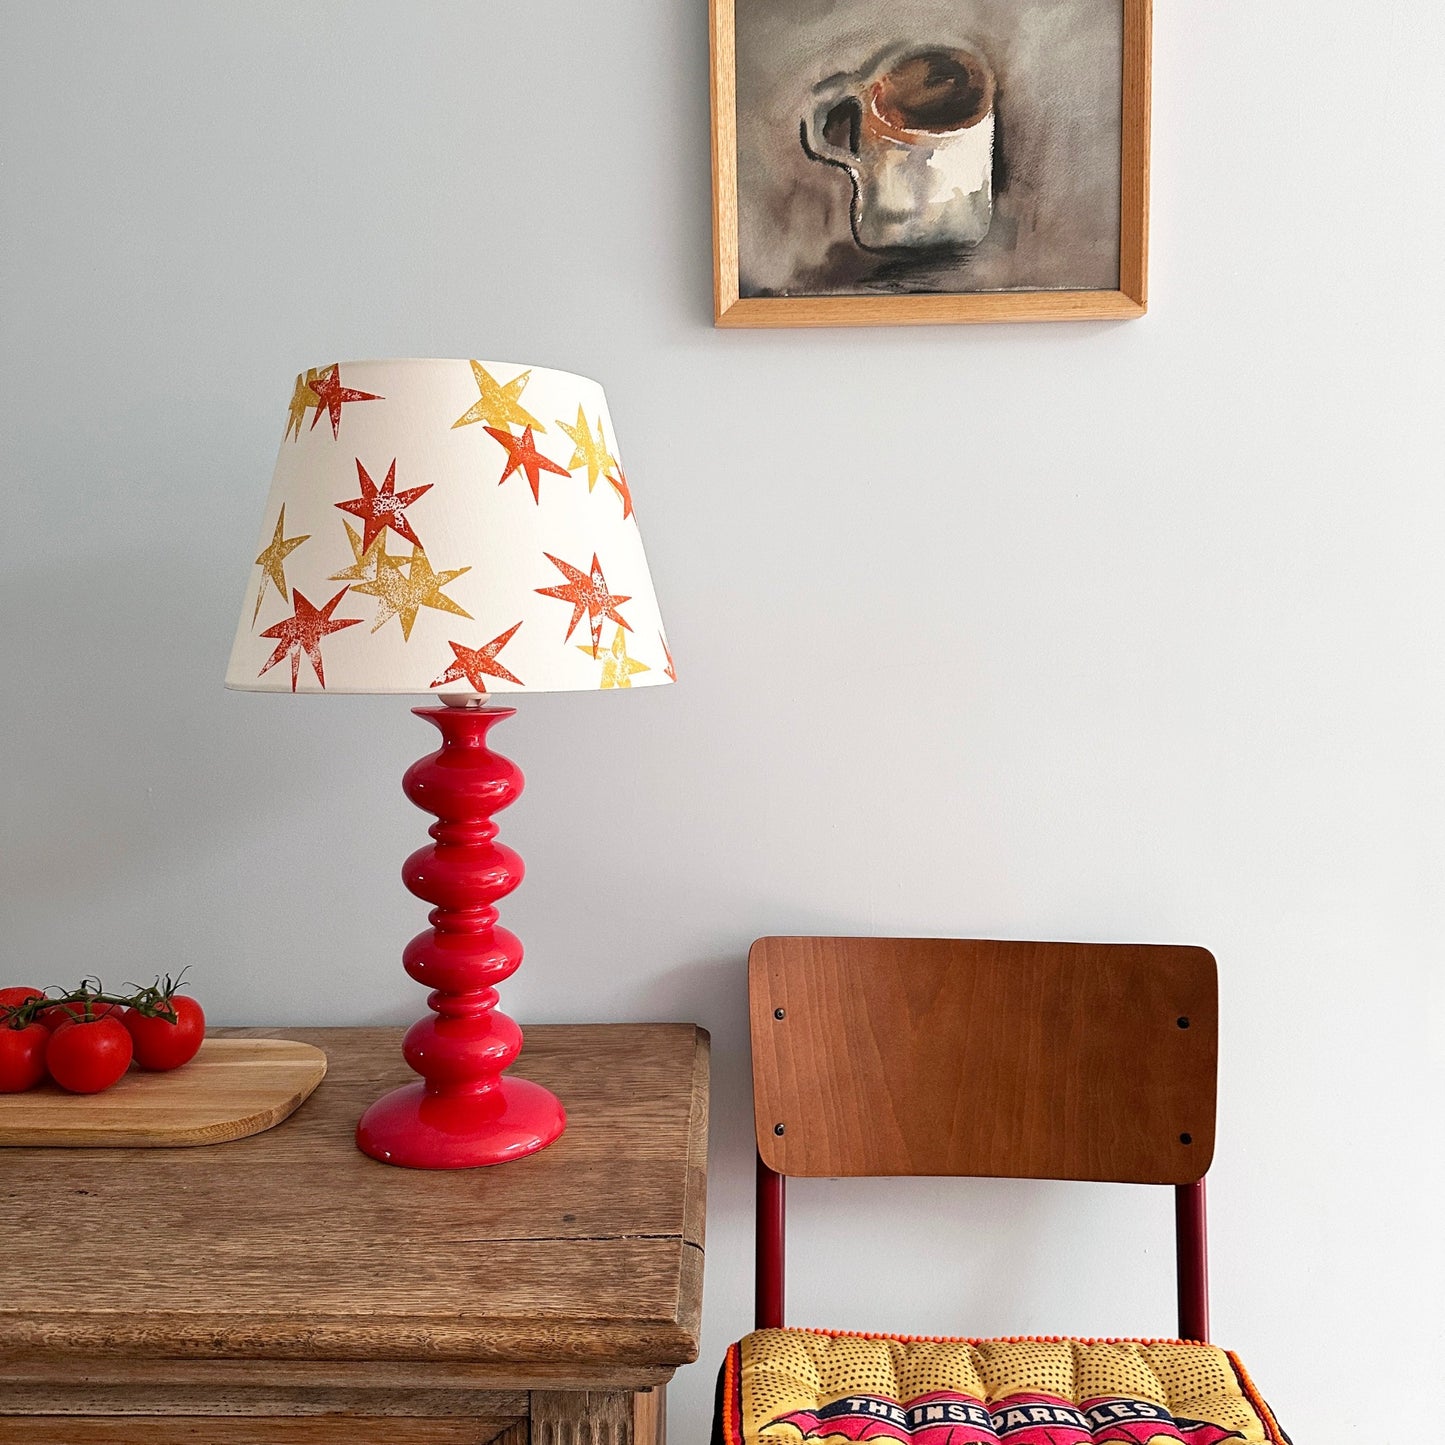 Cream lampshade with orange and yellow stars on a red lamp